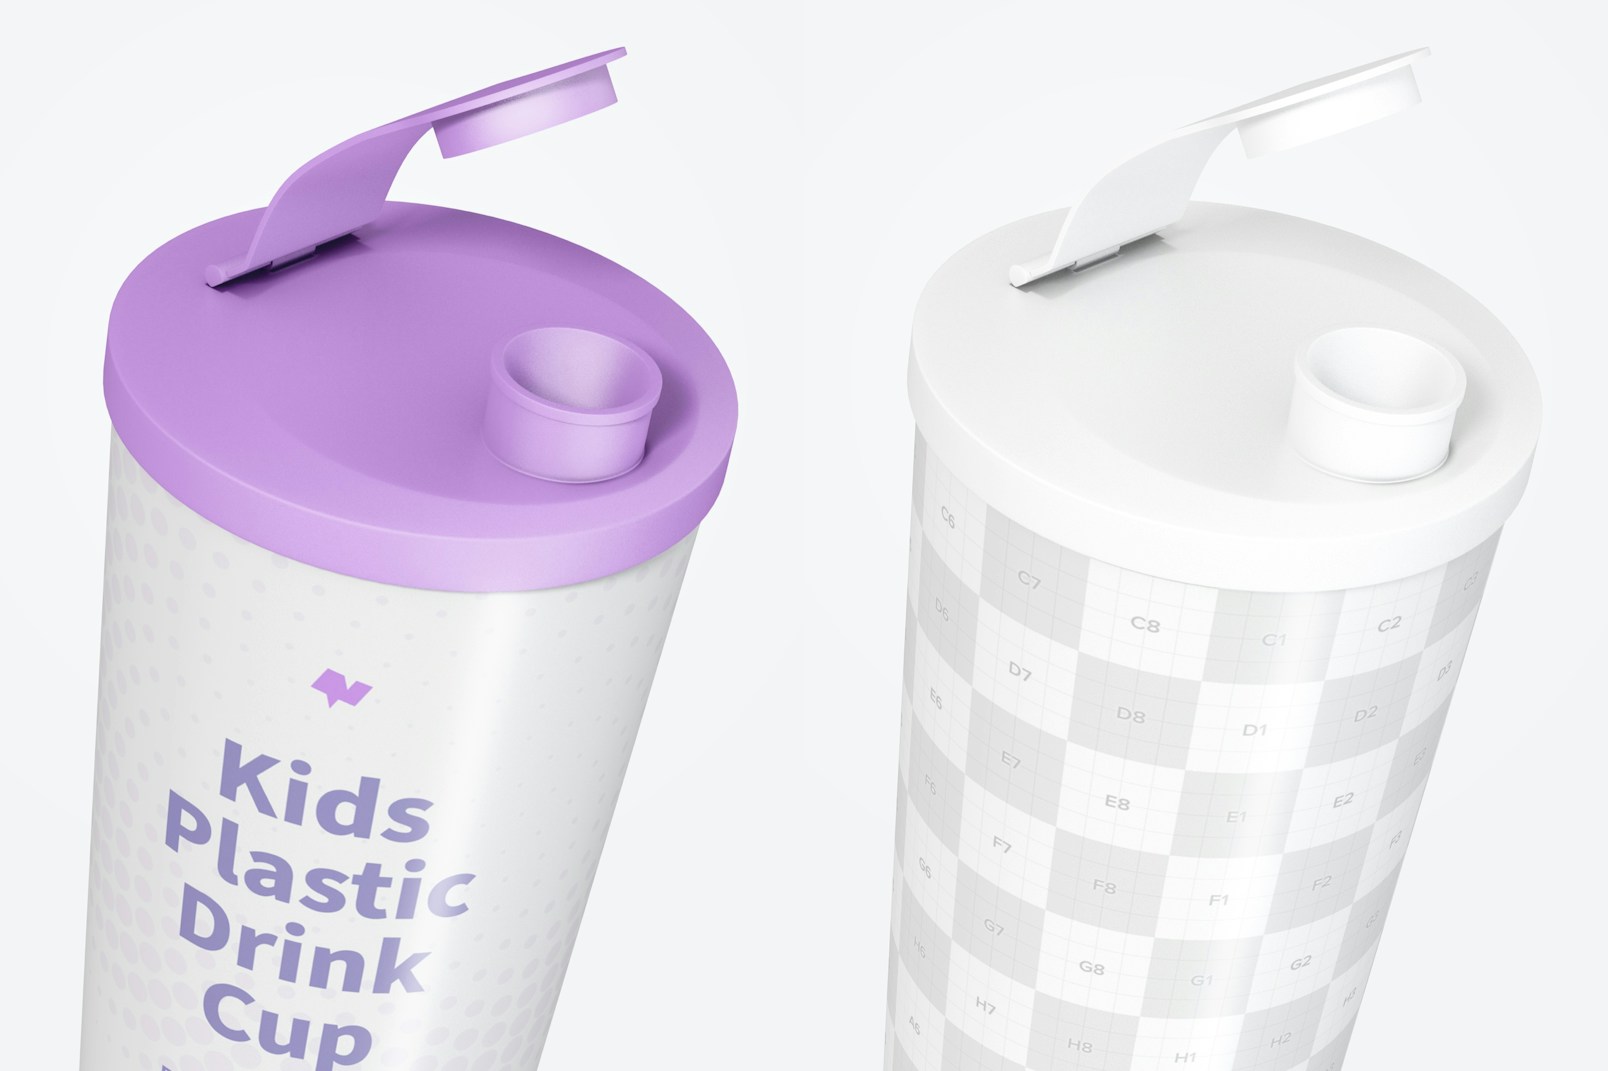 Kids Plastic Drink Cup With Lid Mockup, Close Up